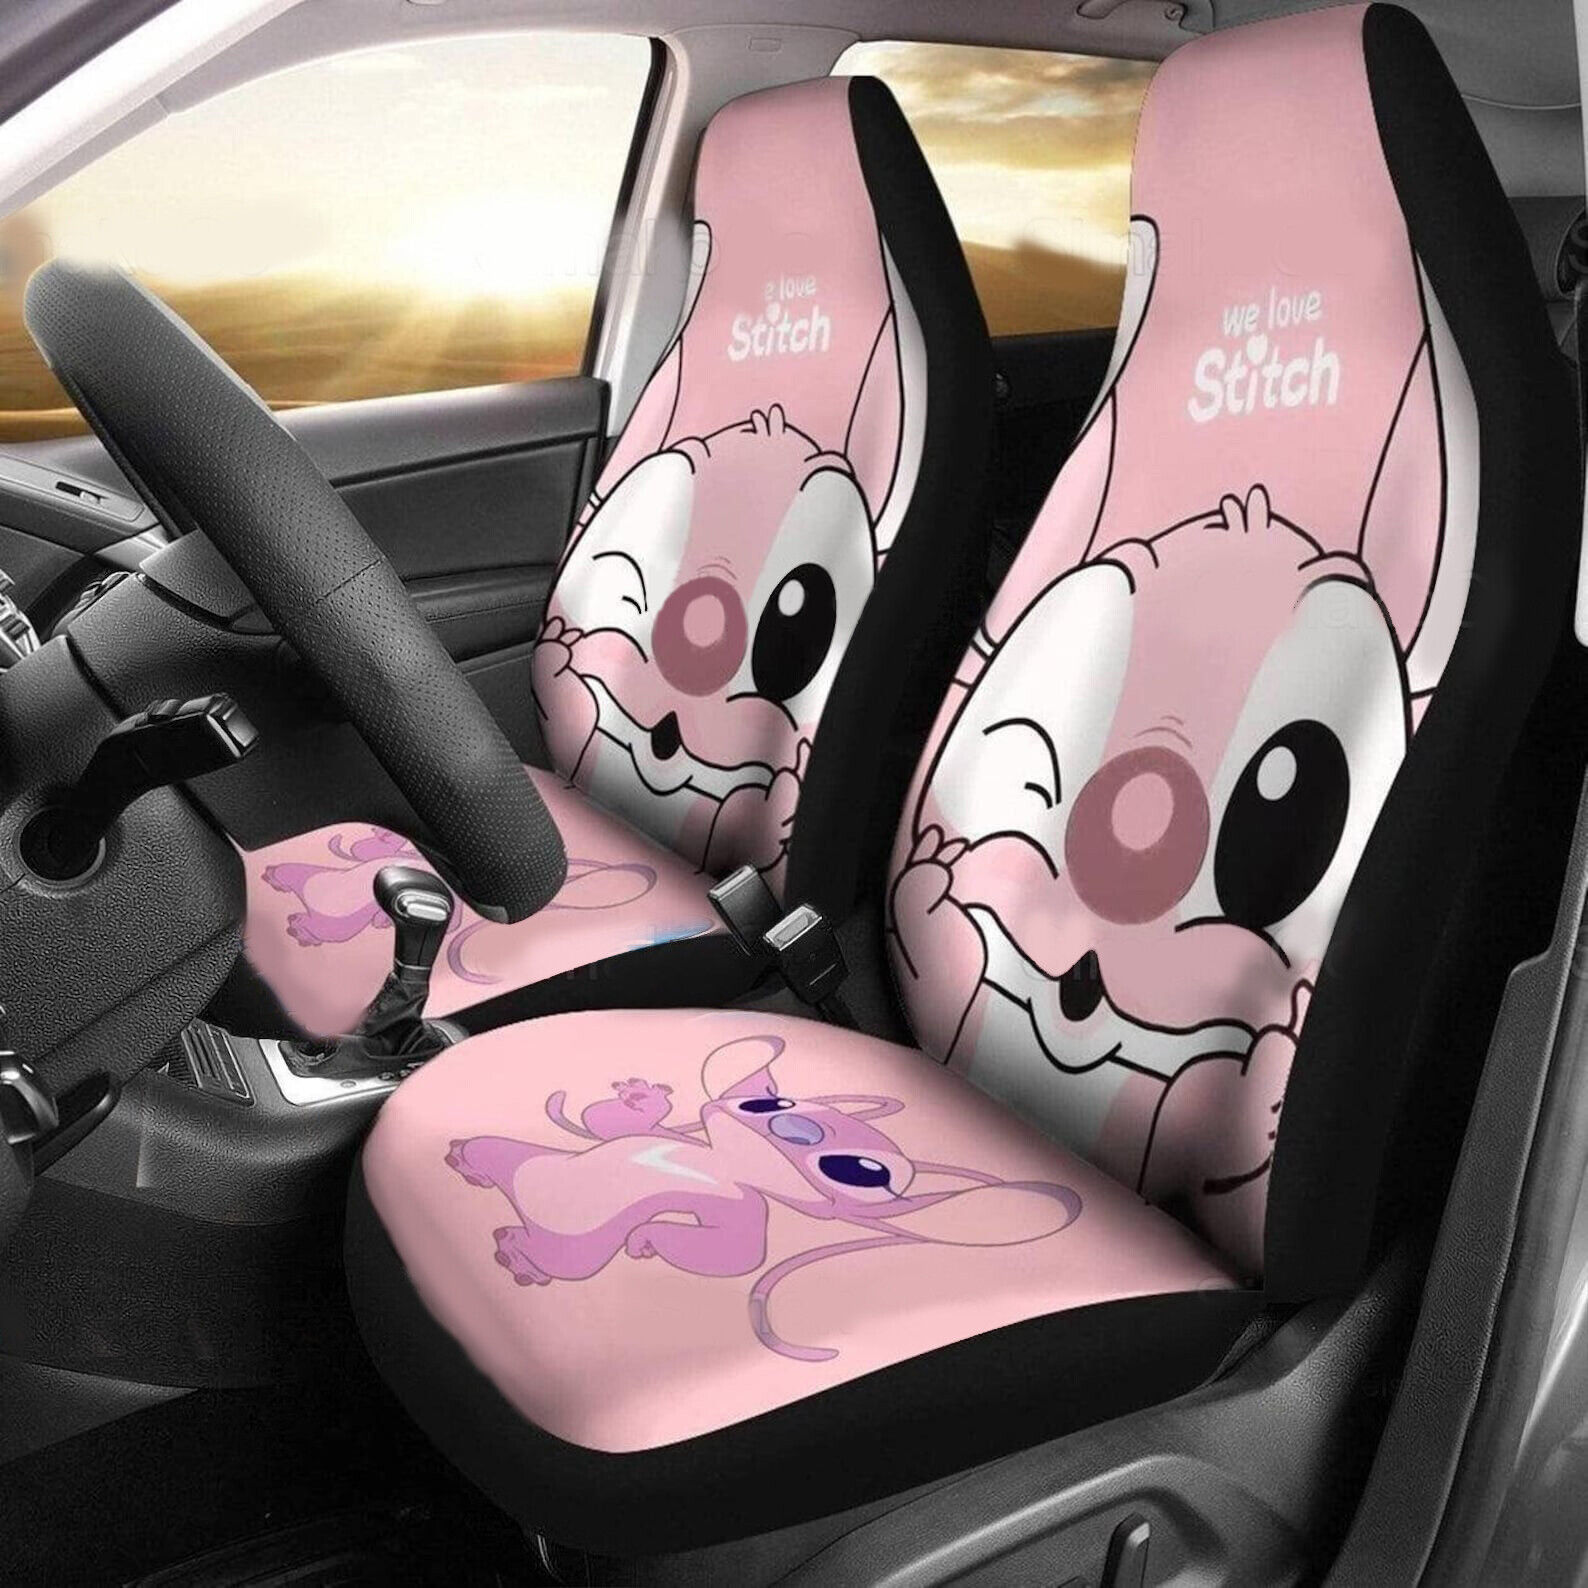 Cute Angel Winking Eye We Love Stitch Angel Lovers Mother\'s Day Car Seat Covers